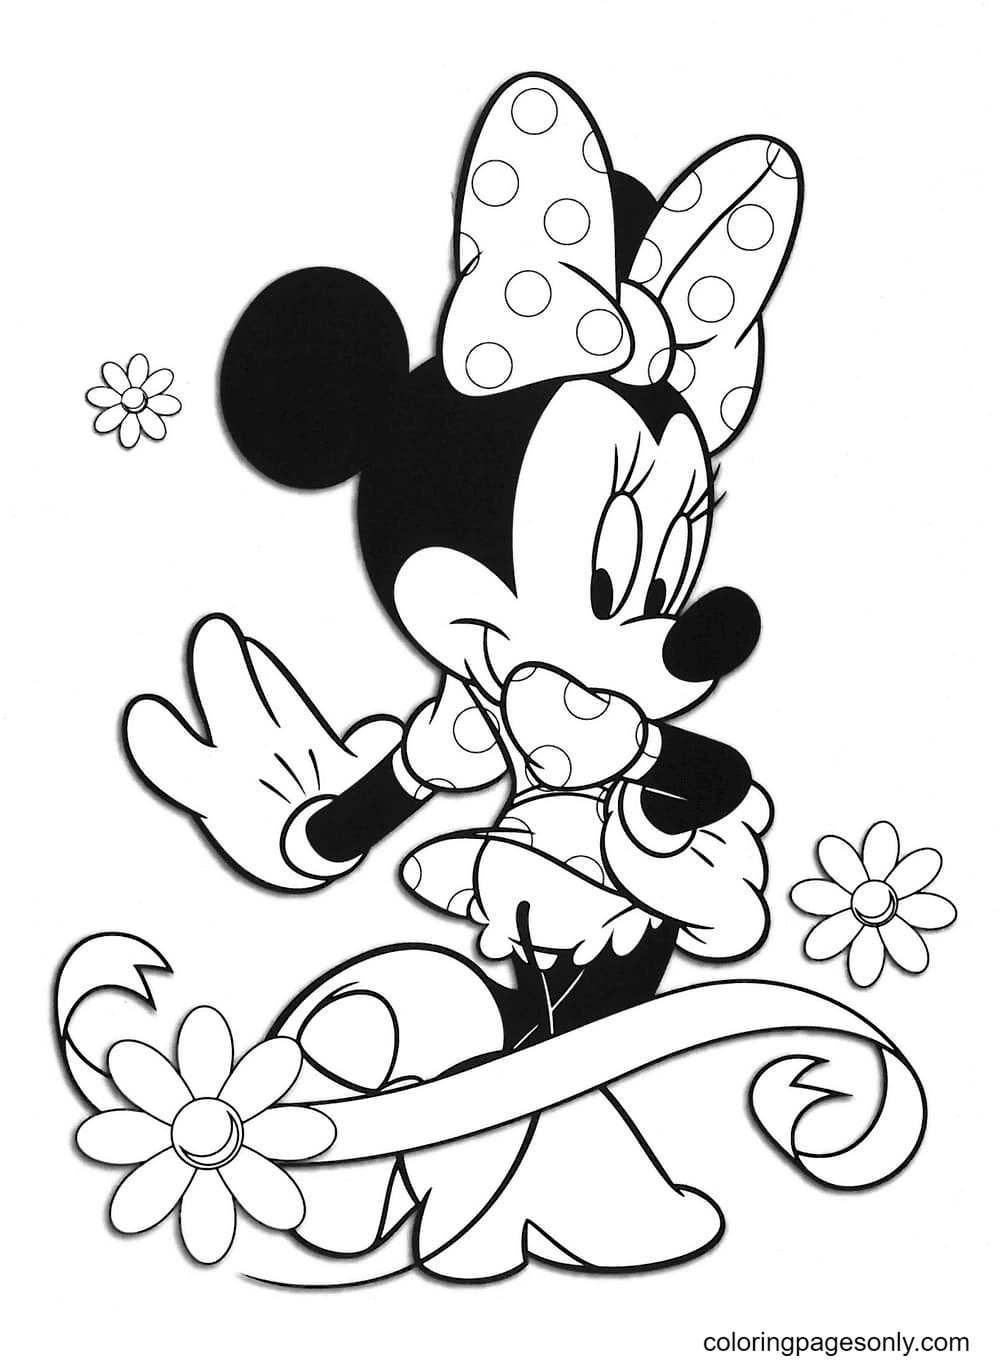 minnie-mouse-with-polka-dot-skirt-and-bow-coloring-page-free-printable-coloring-pages